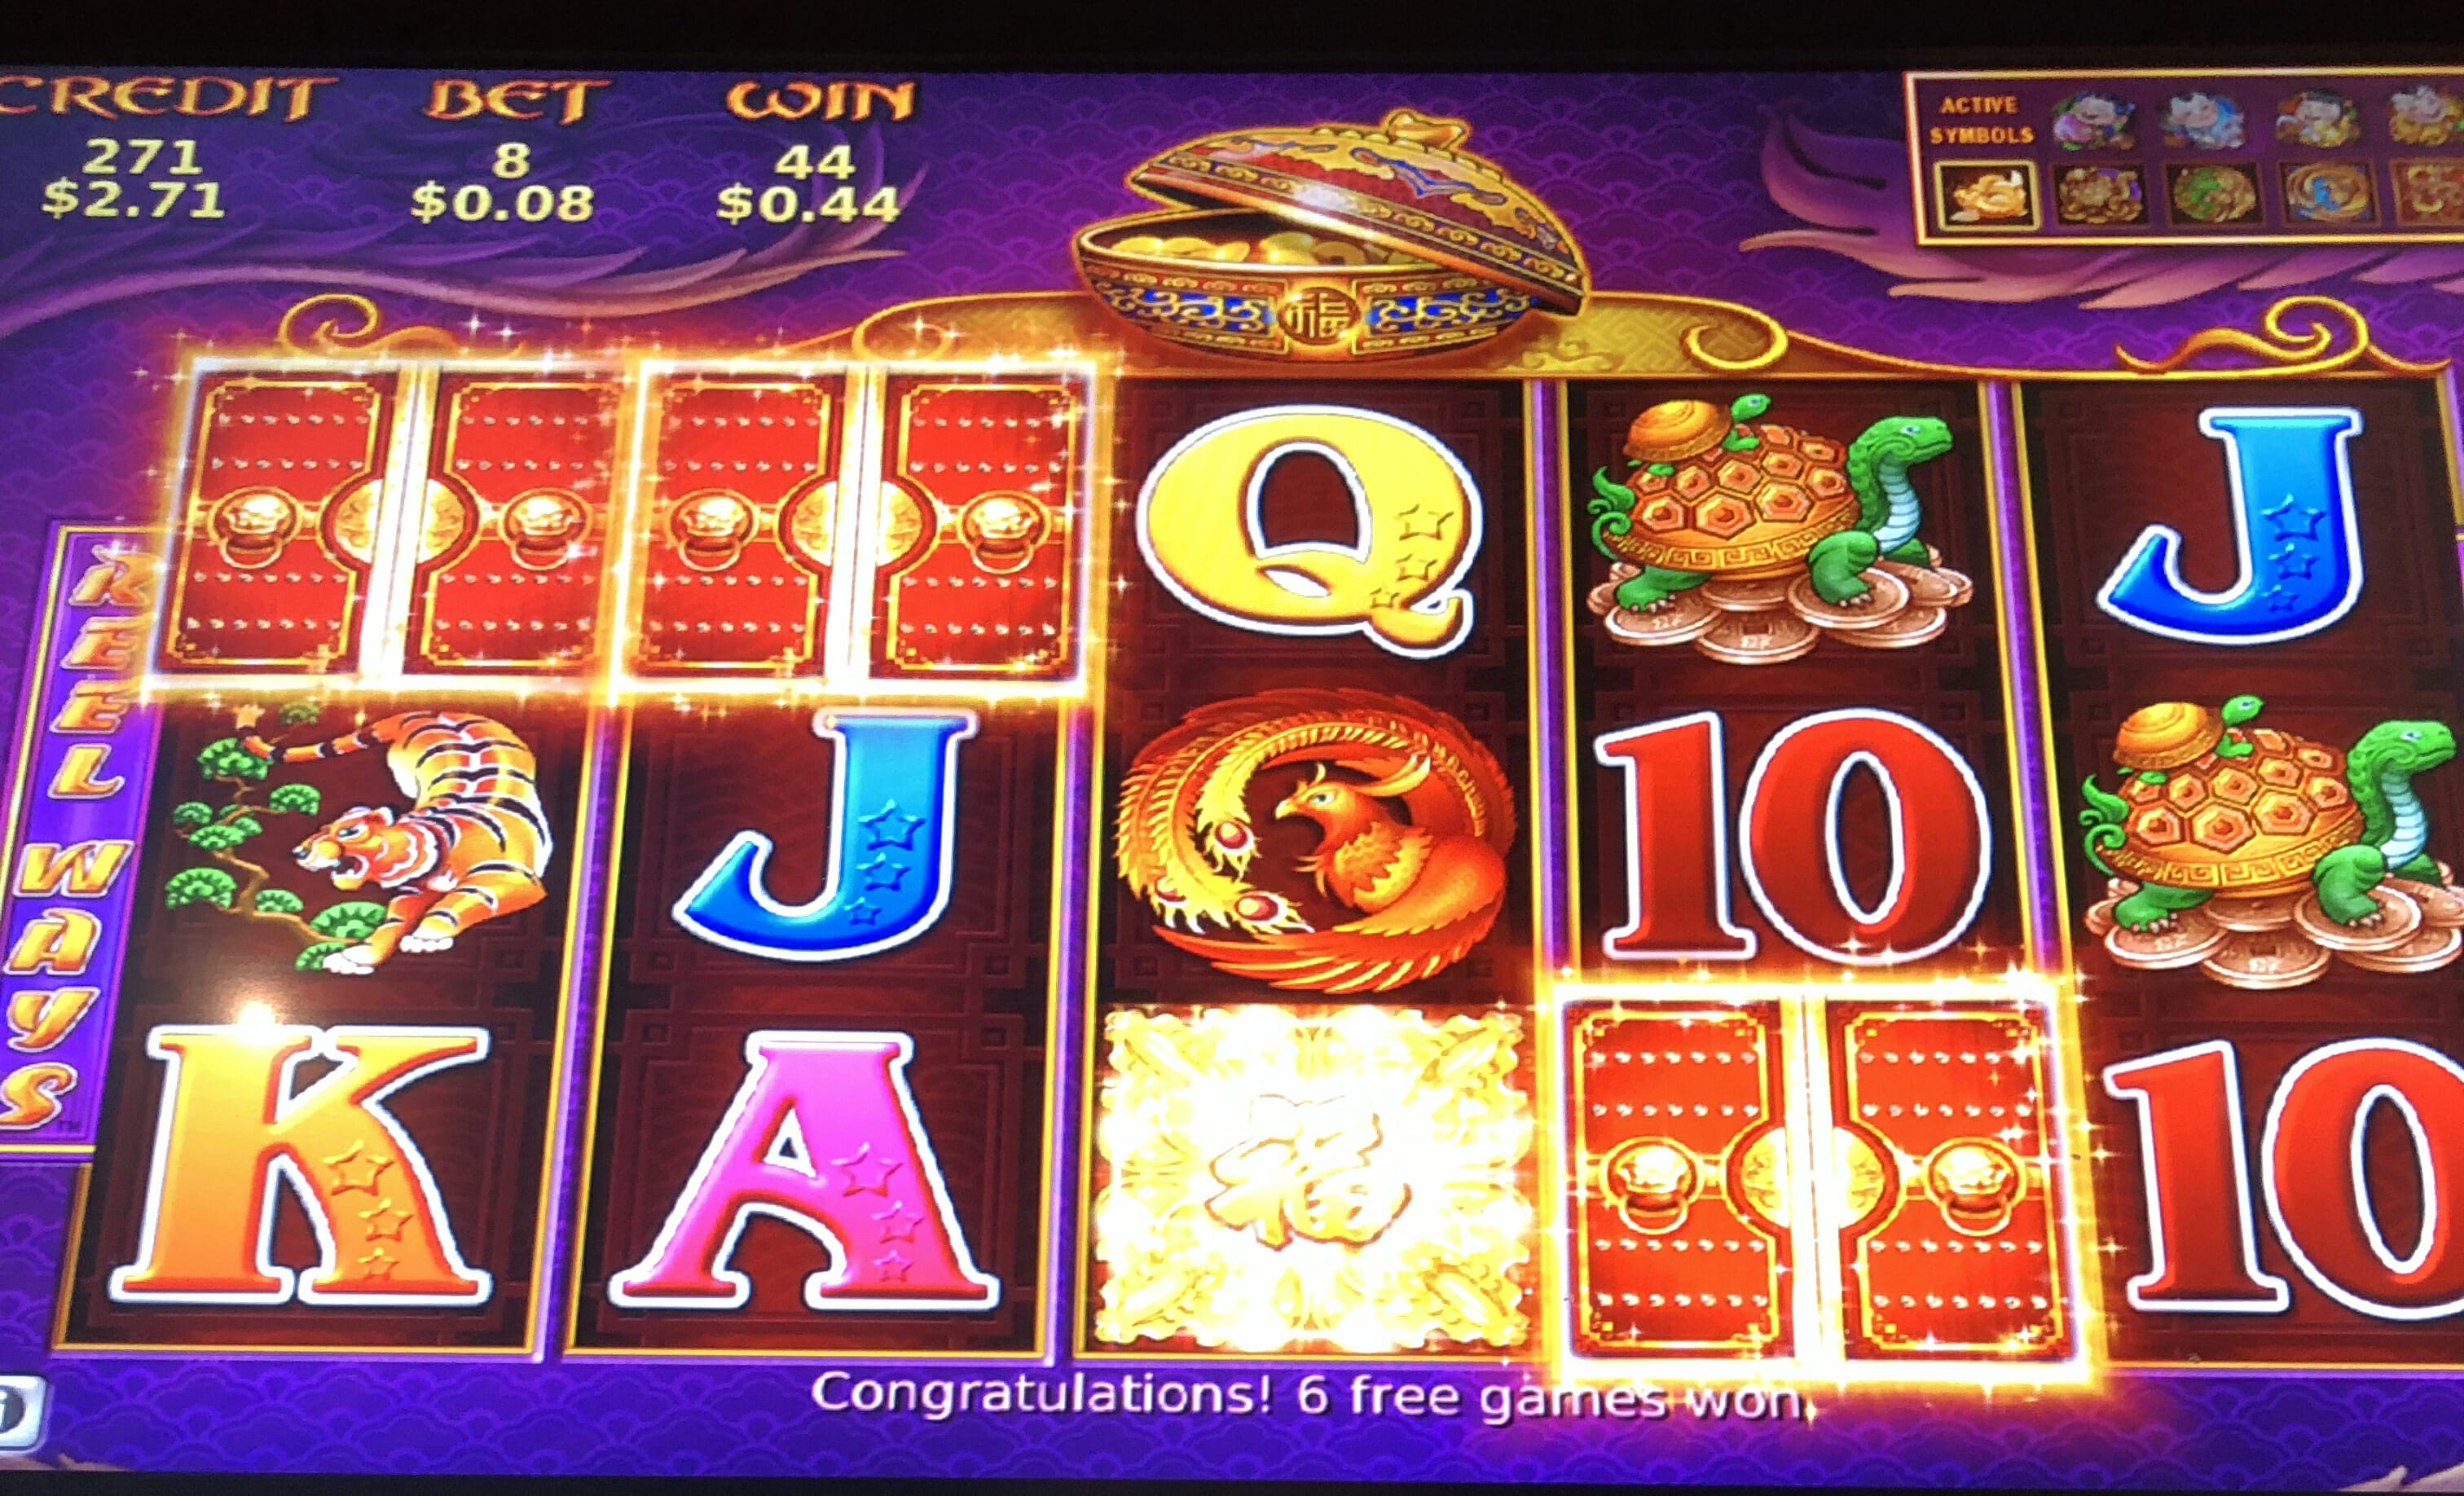 How to tell if slot machine is hot